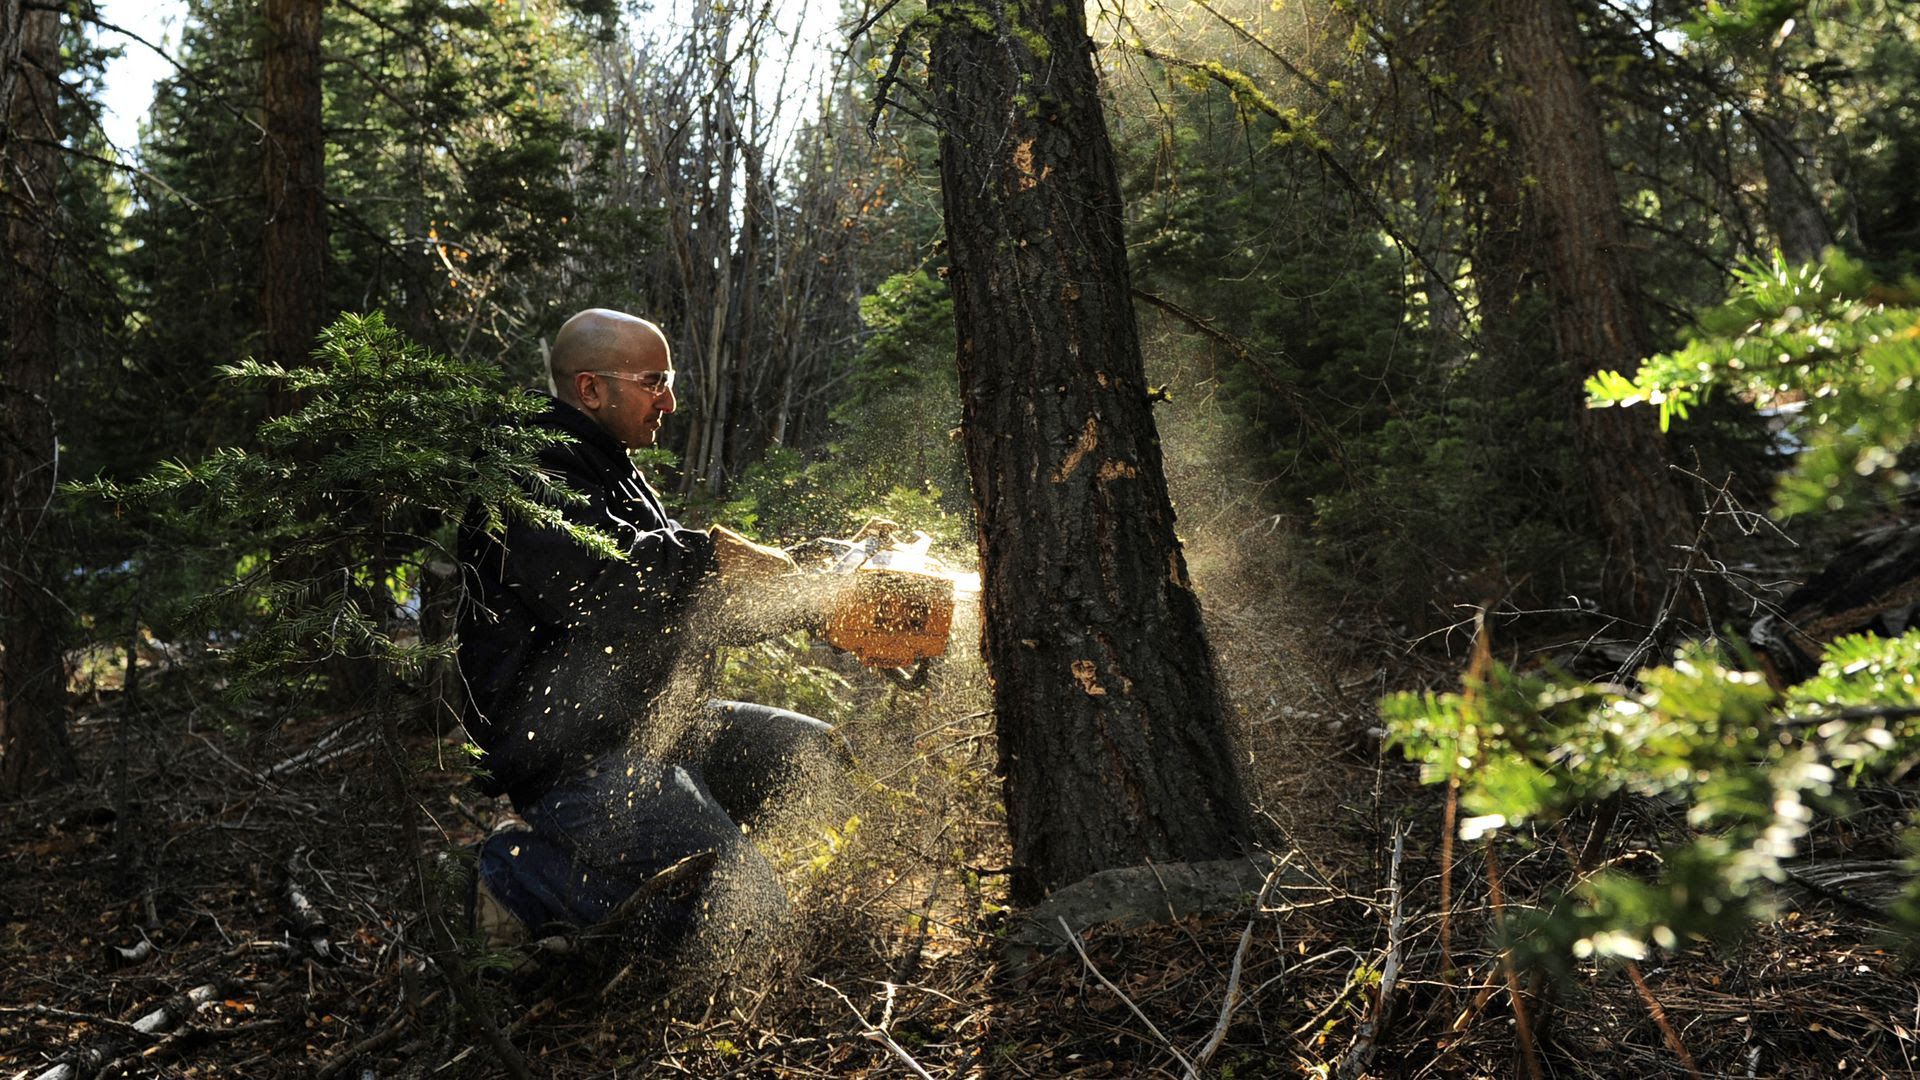 Neel Kashkari treats a tree on his property as though it were the current 2.5% Fed Funds target rate. Photo: Linda Davidson/The Washington Post via Getty Images